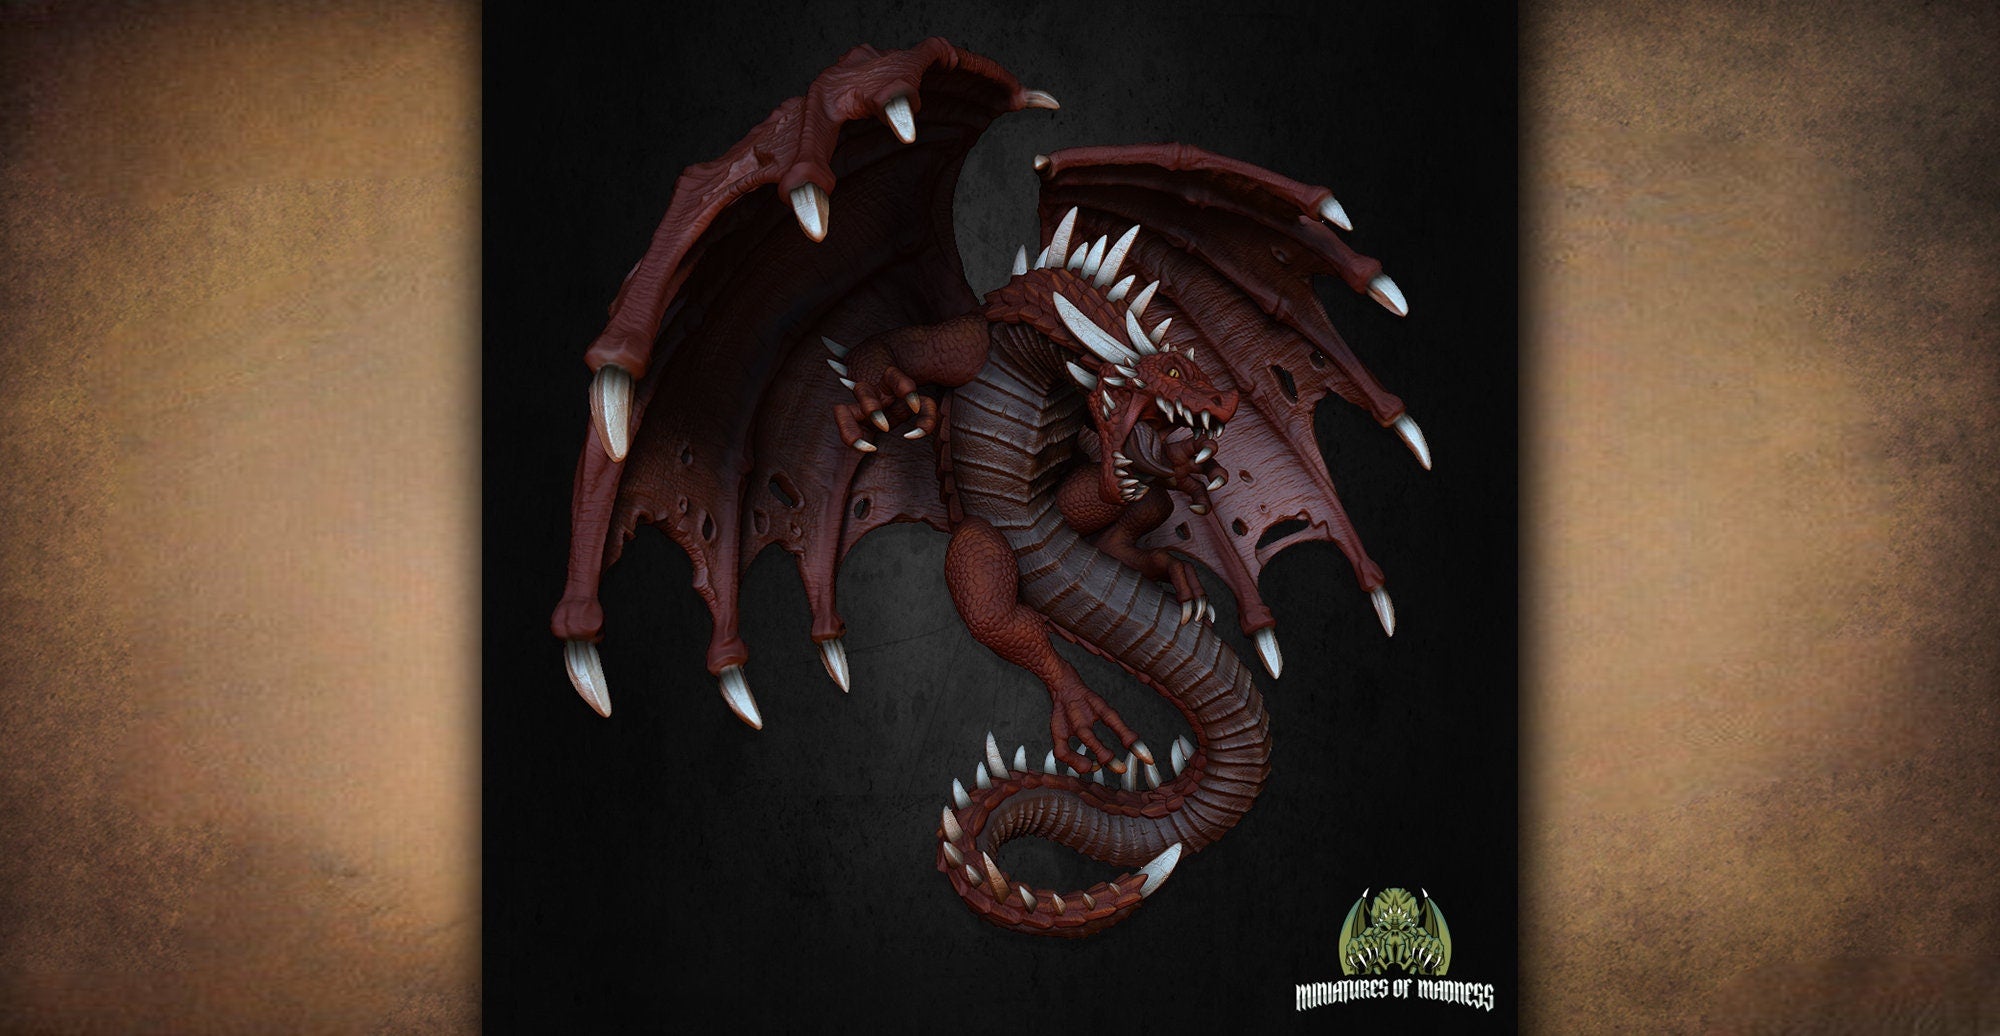 RED DRAGON "Last Words" | 12K 3D Print | Dungeons and Dragons | DnD | Pathfinder | Tabletop | Hero Size | 28-32 mm-Role Playing Miniatures